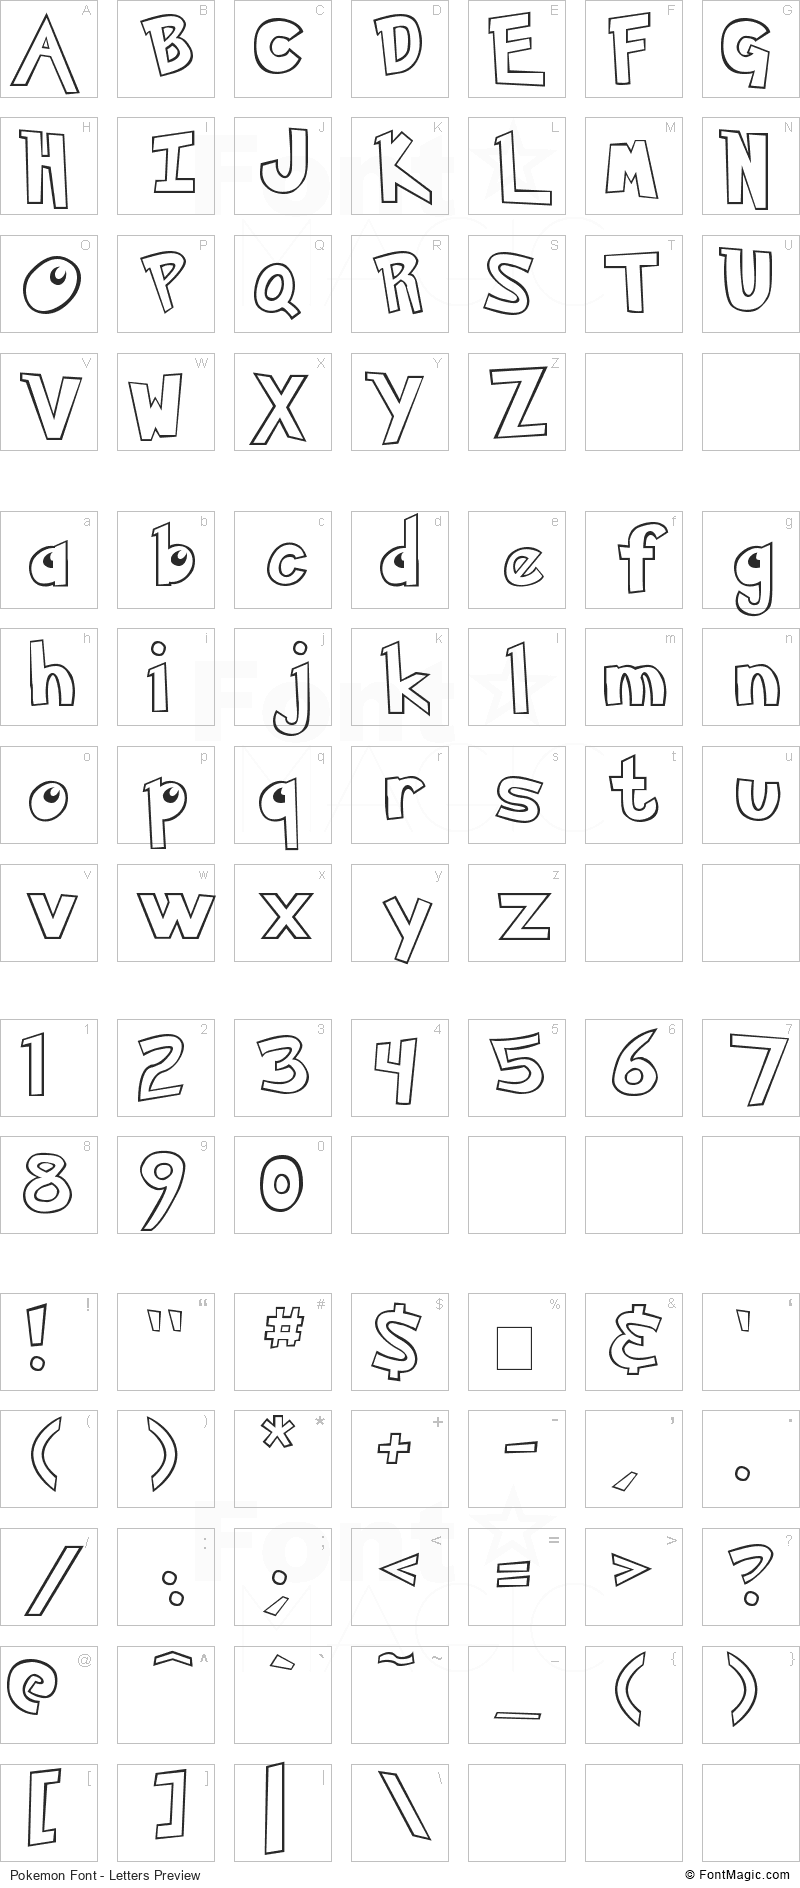 Pokemon Font - All Latters Preview Chart